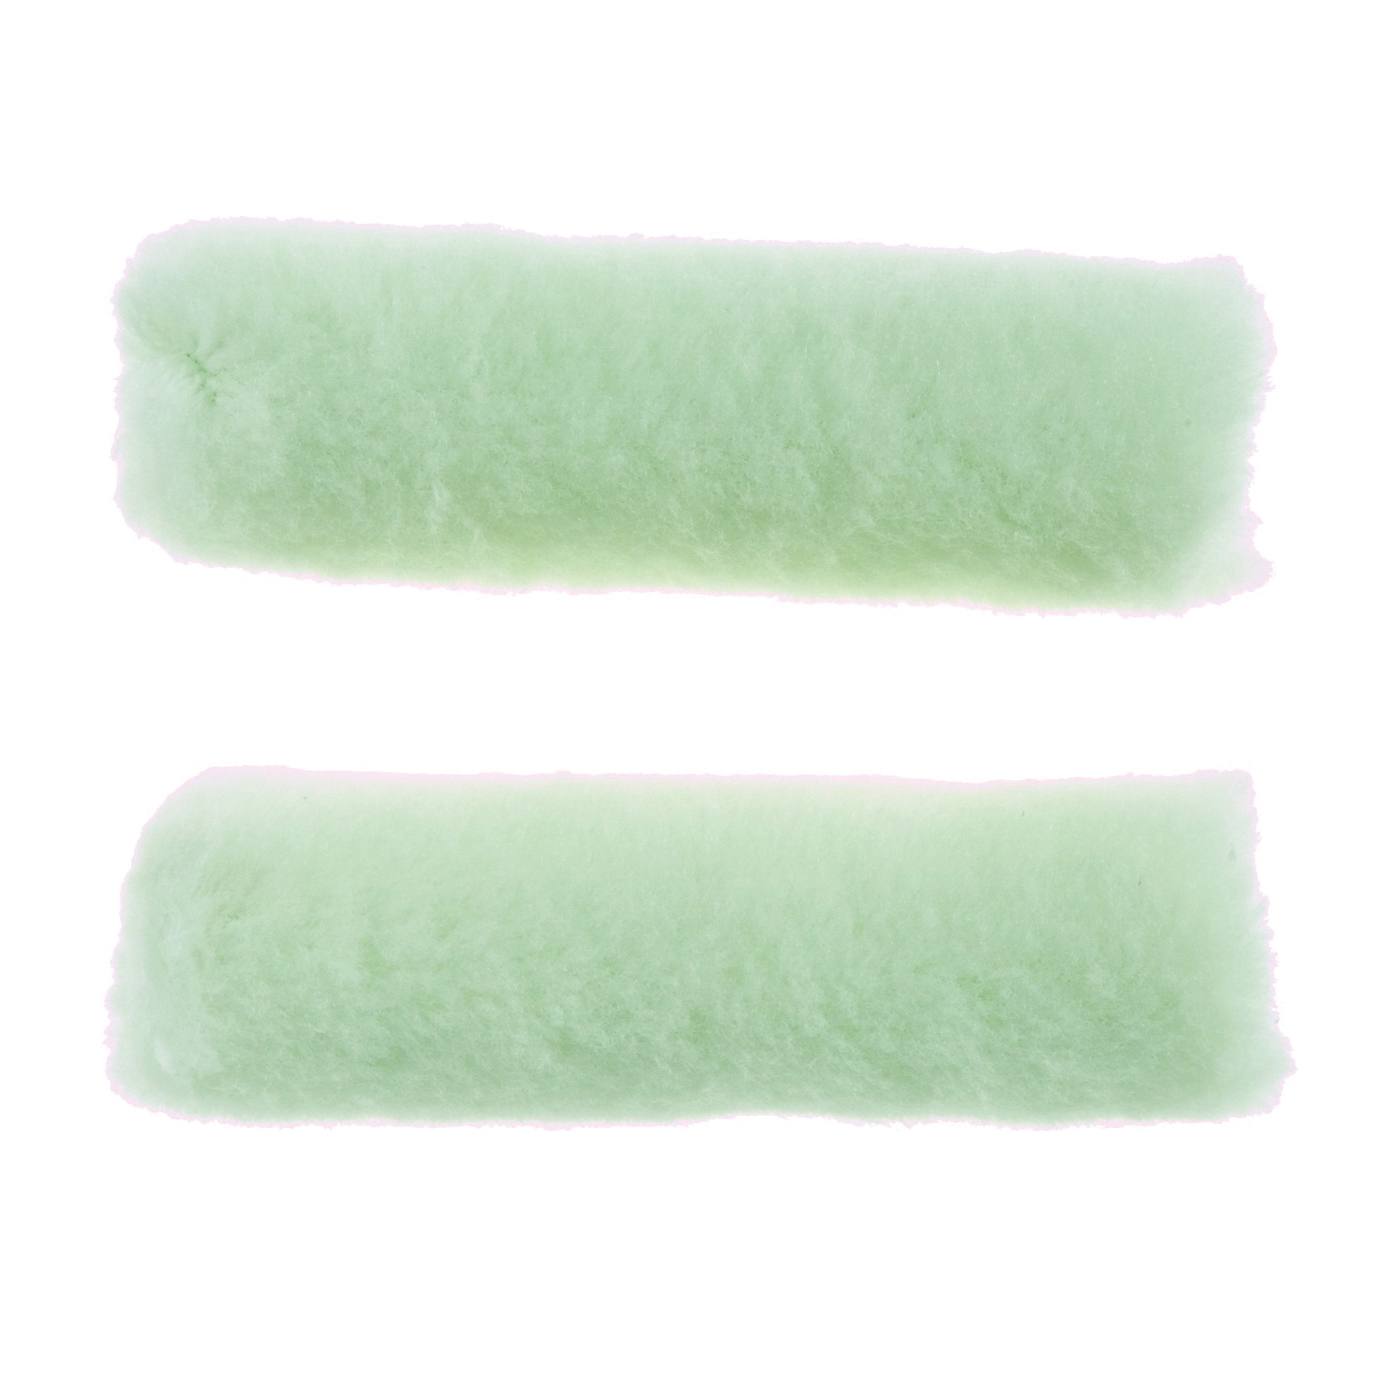 Linzer MR400-2 Paint Roller Cover, 1/8 in Thick Nap, 4 in L, High-Density Flocked Foam Cover